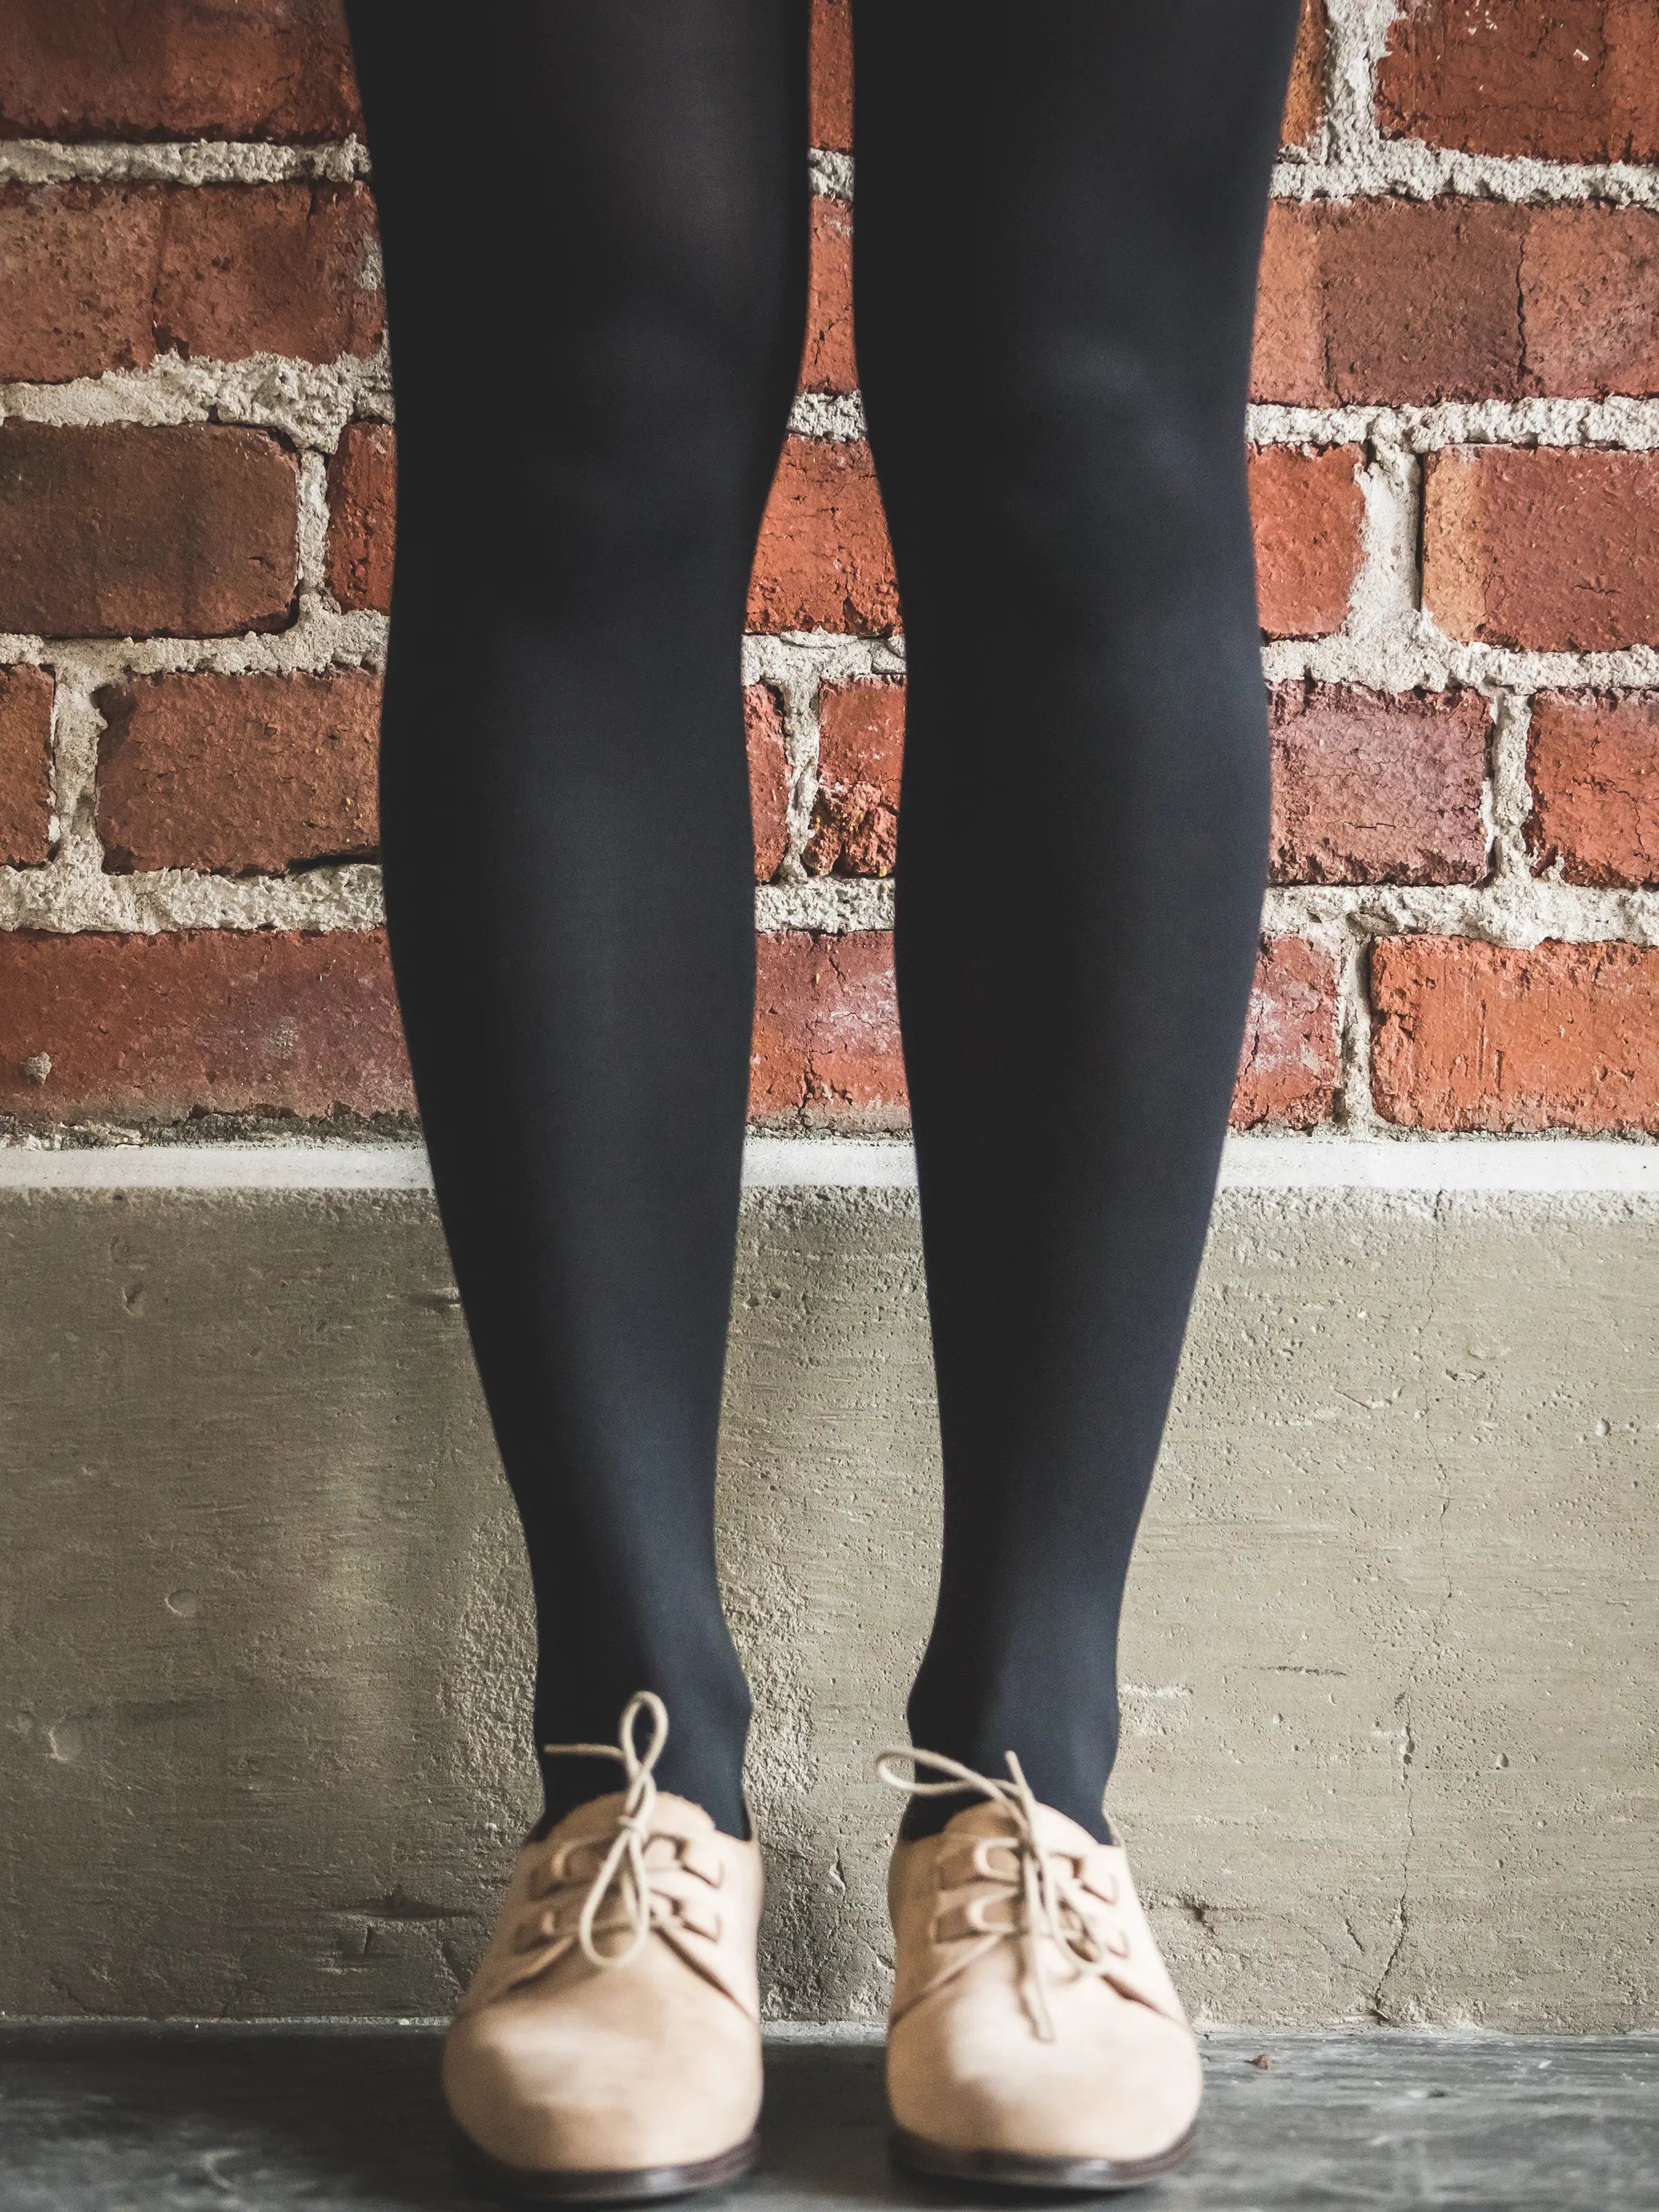 Anna Ethically Made Sheer Tights - Navy Blue – Miss Lala